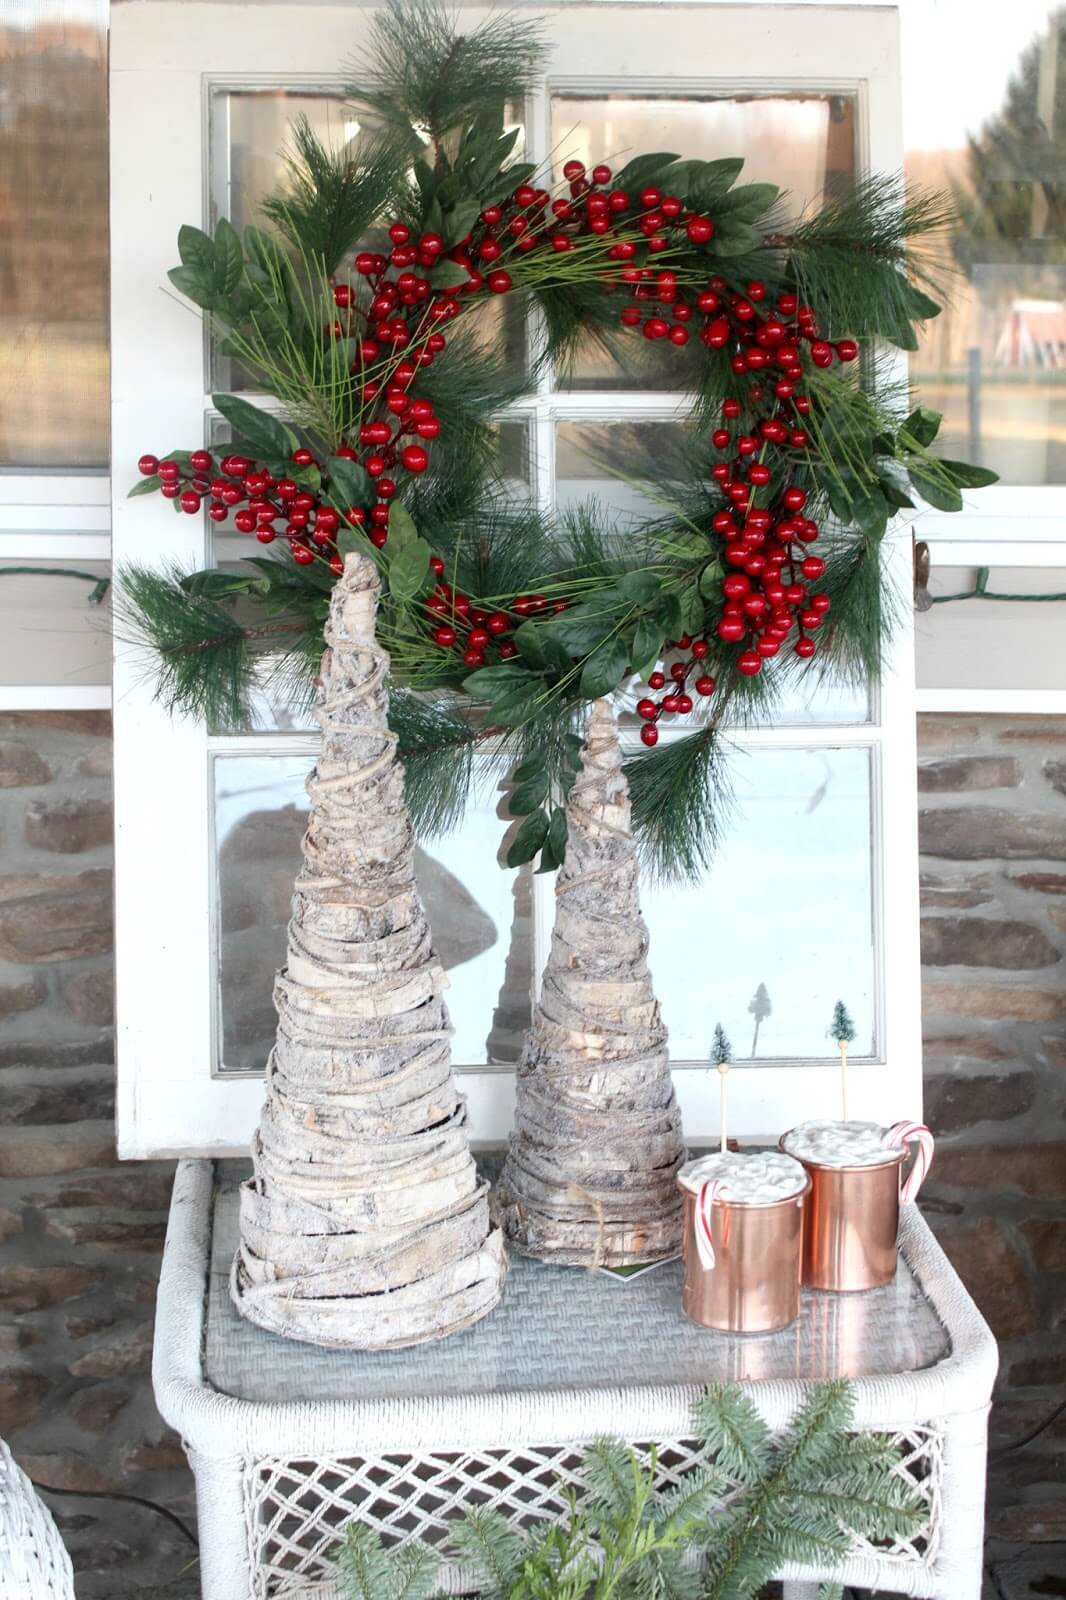 Antique Window With Holiday Wreath Porch Display